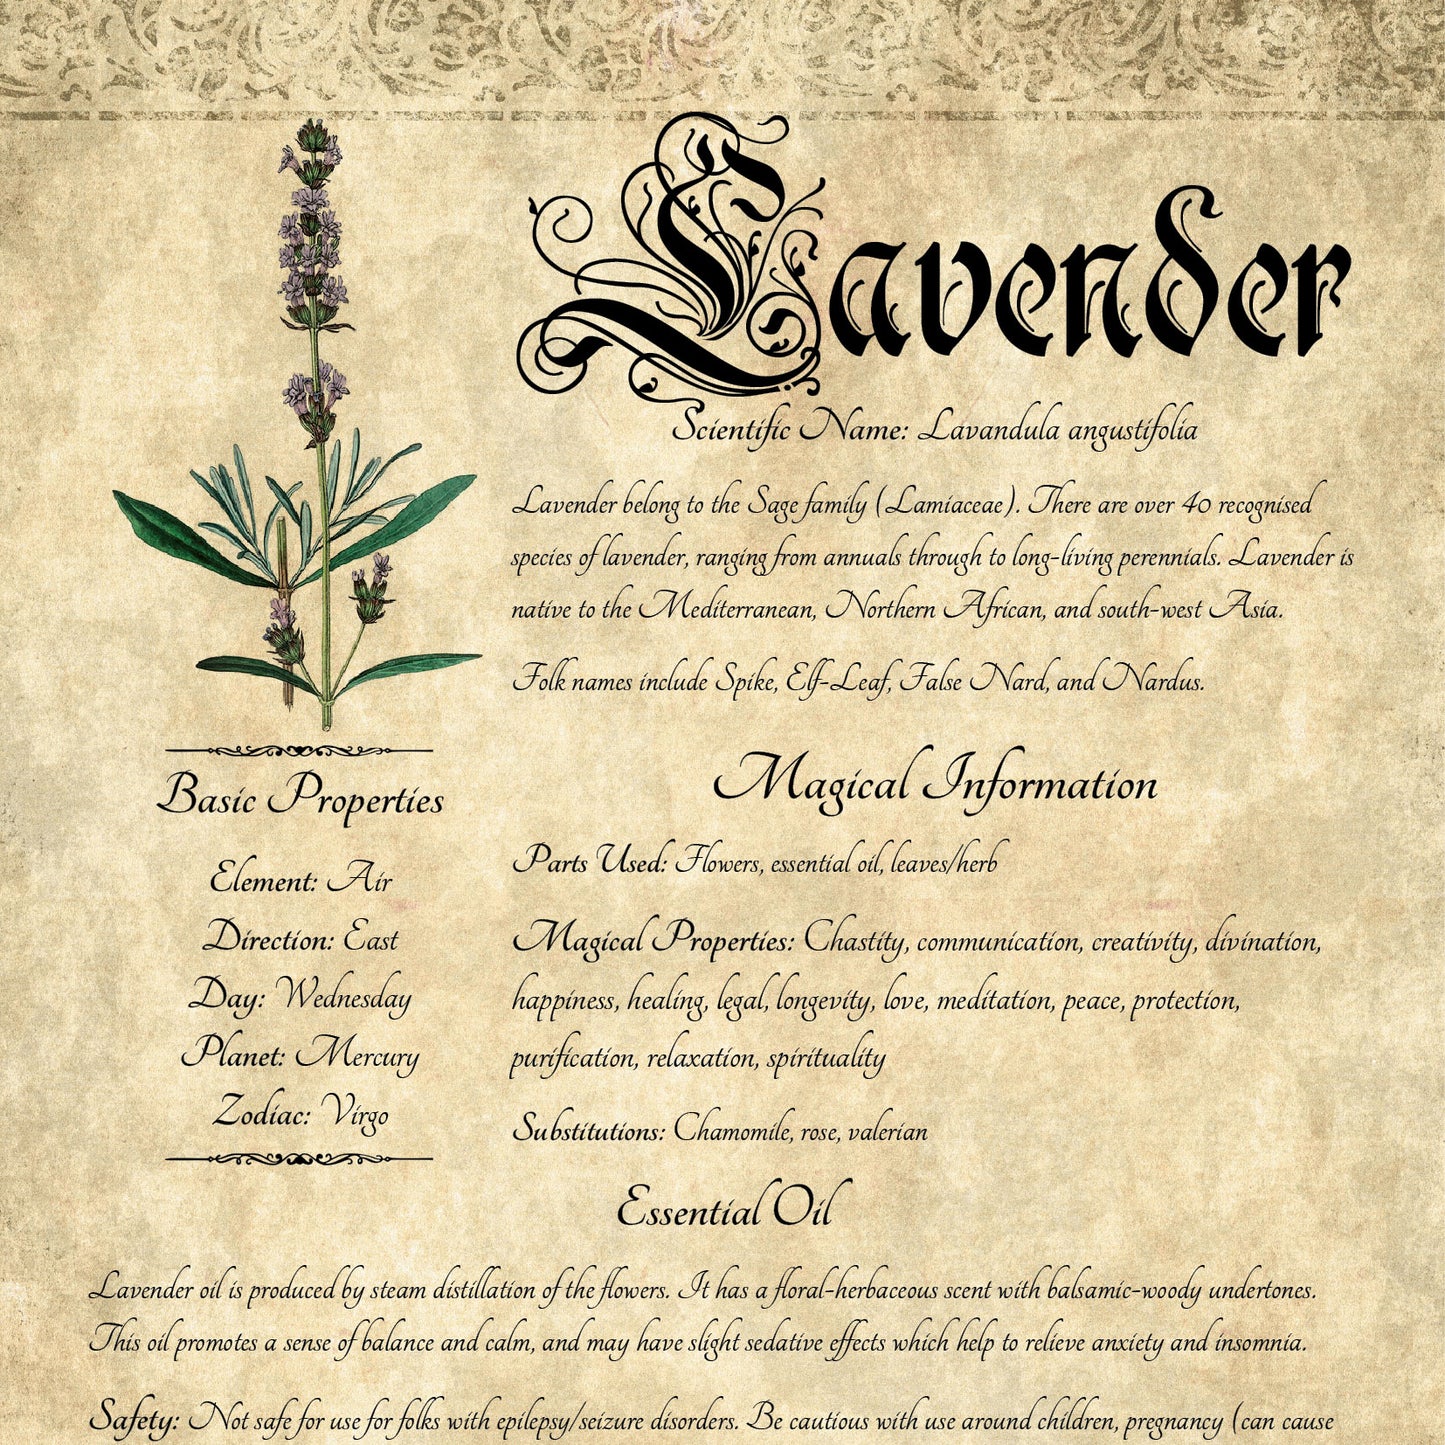 Antique-style grimoire page on the properties of Lavender, with an aged paper background and script font